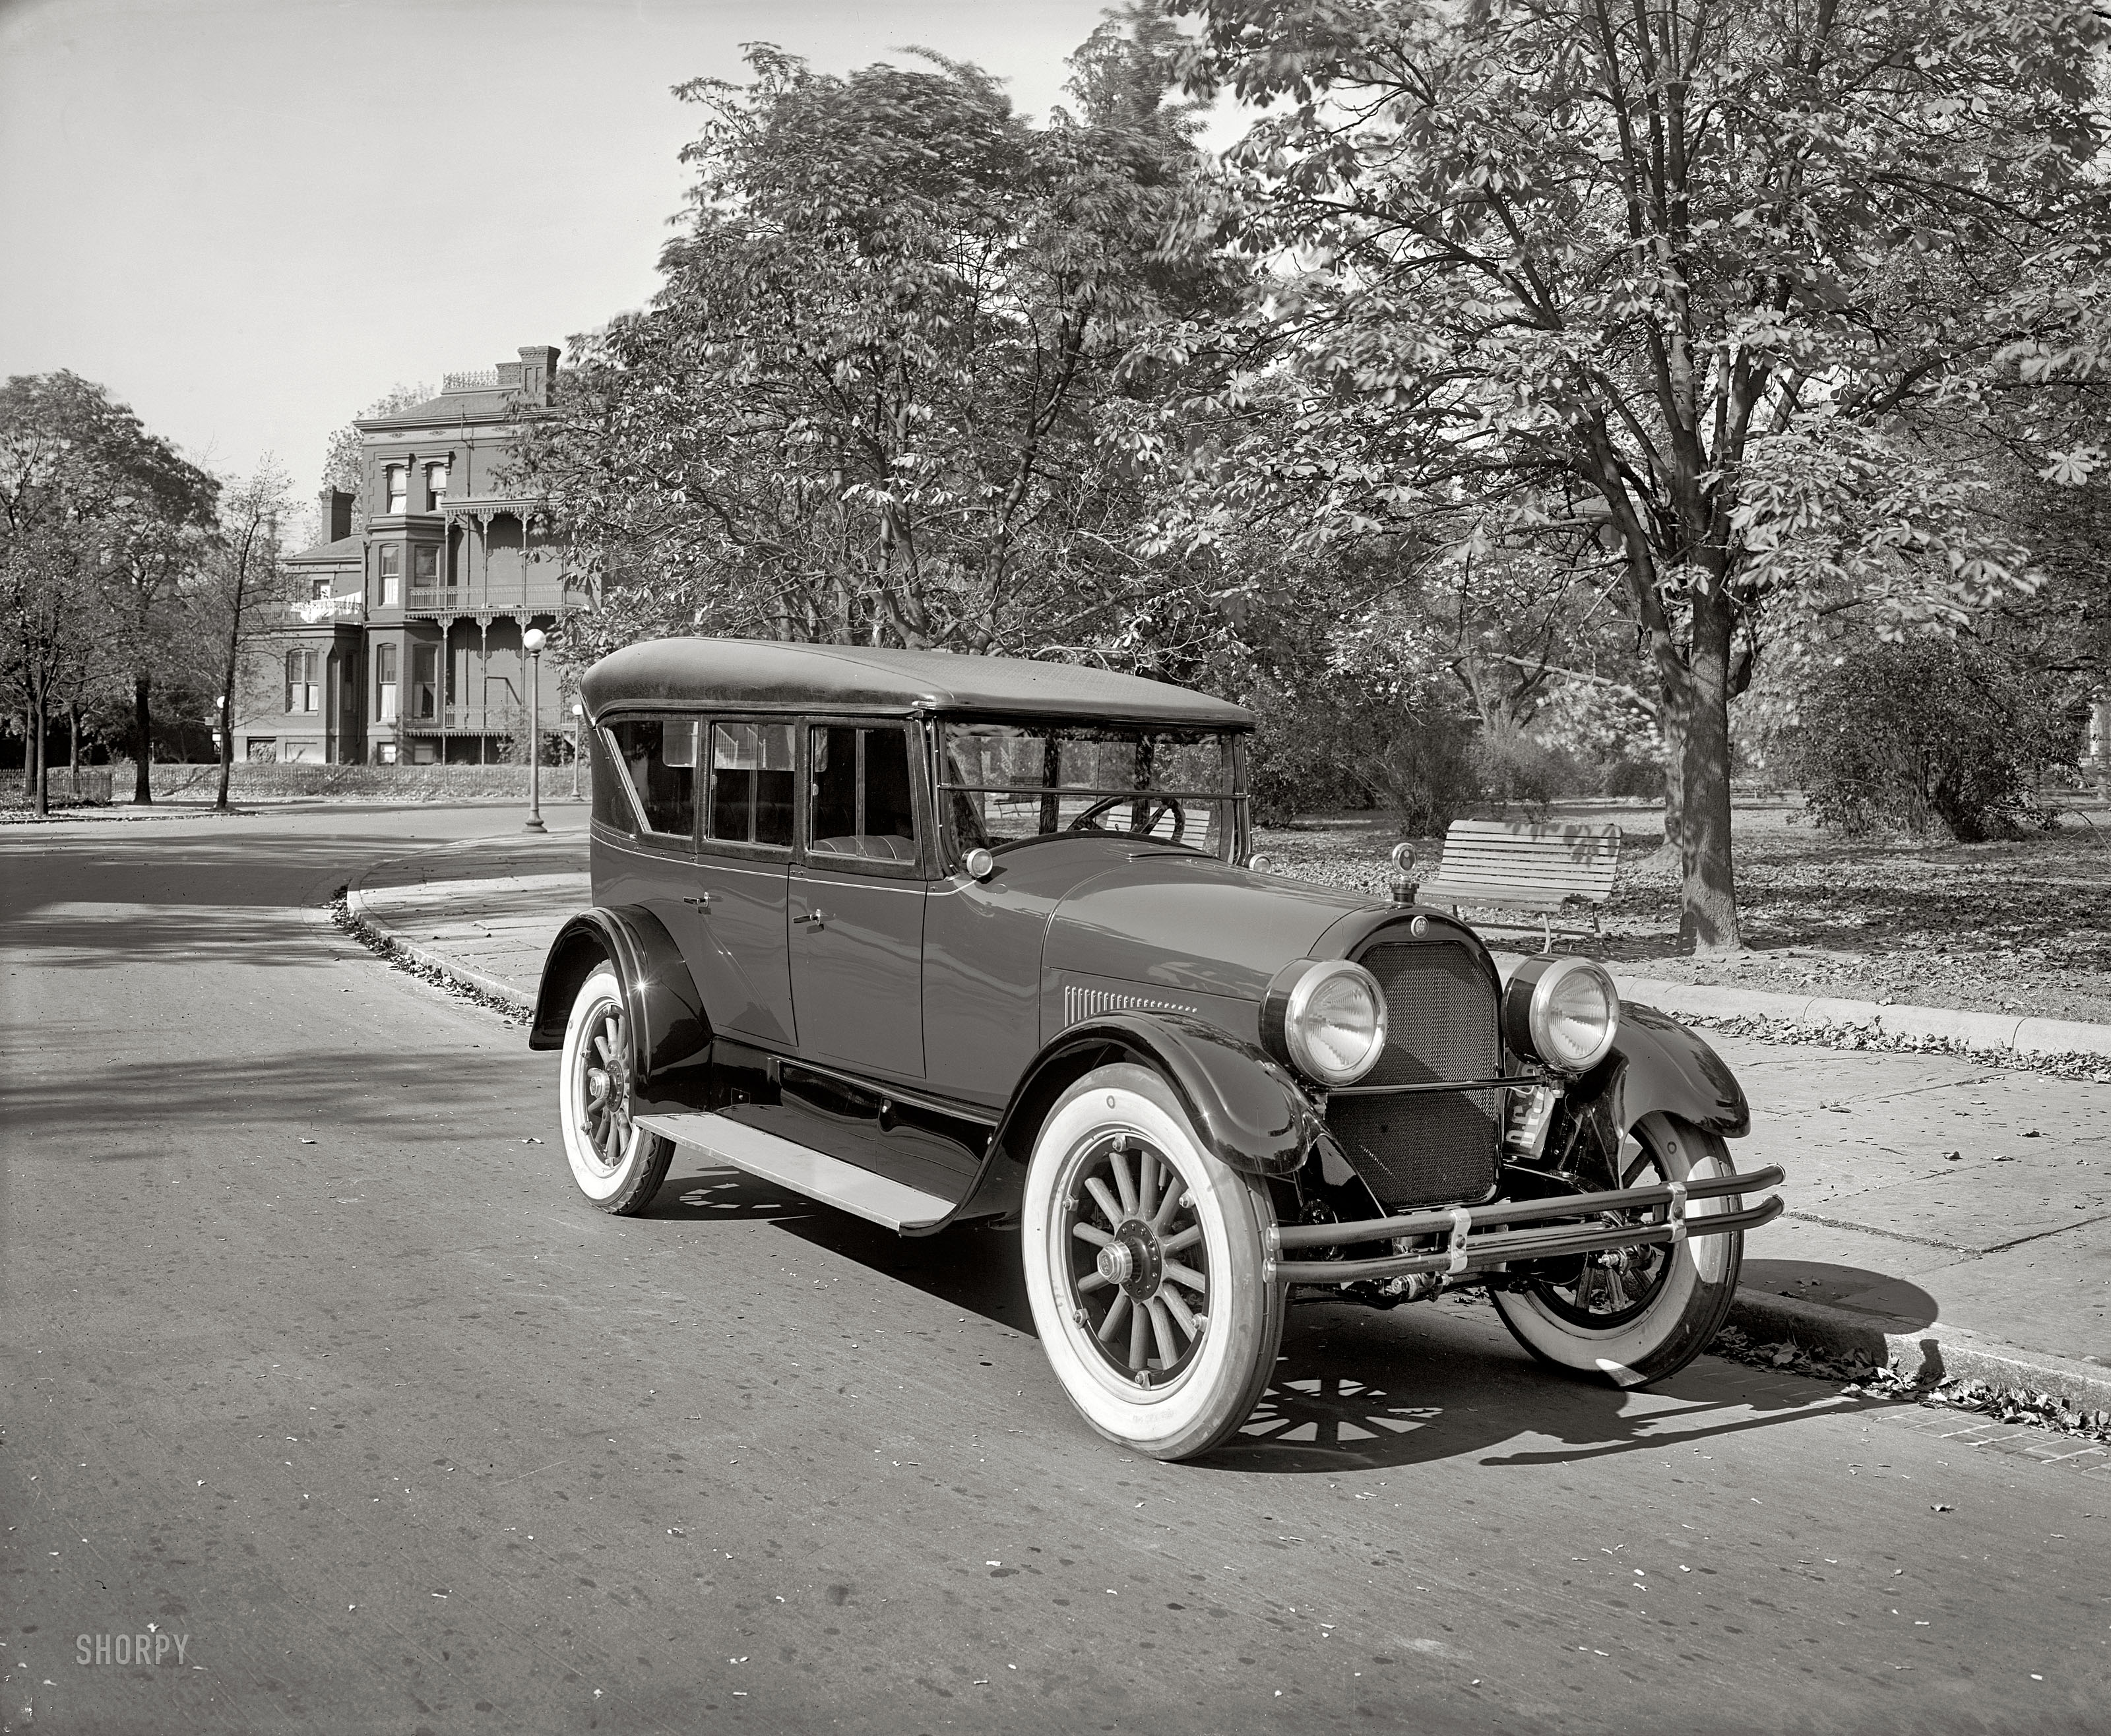 1924. "Peerless car." Laundry day somewhere in Northwest Washington, D.C. National Photo Company Collection glass negative. View full size.